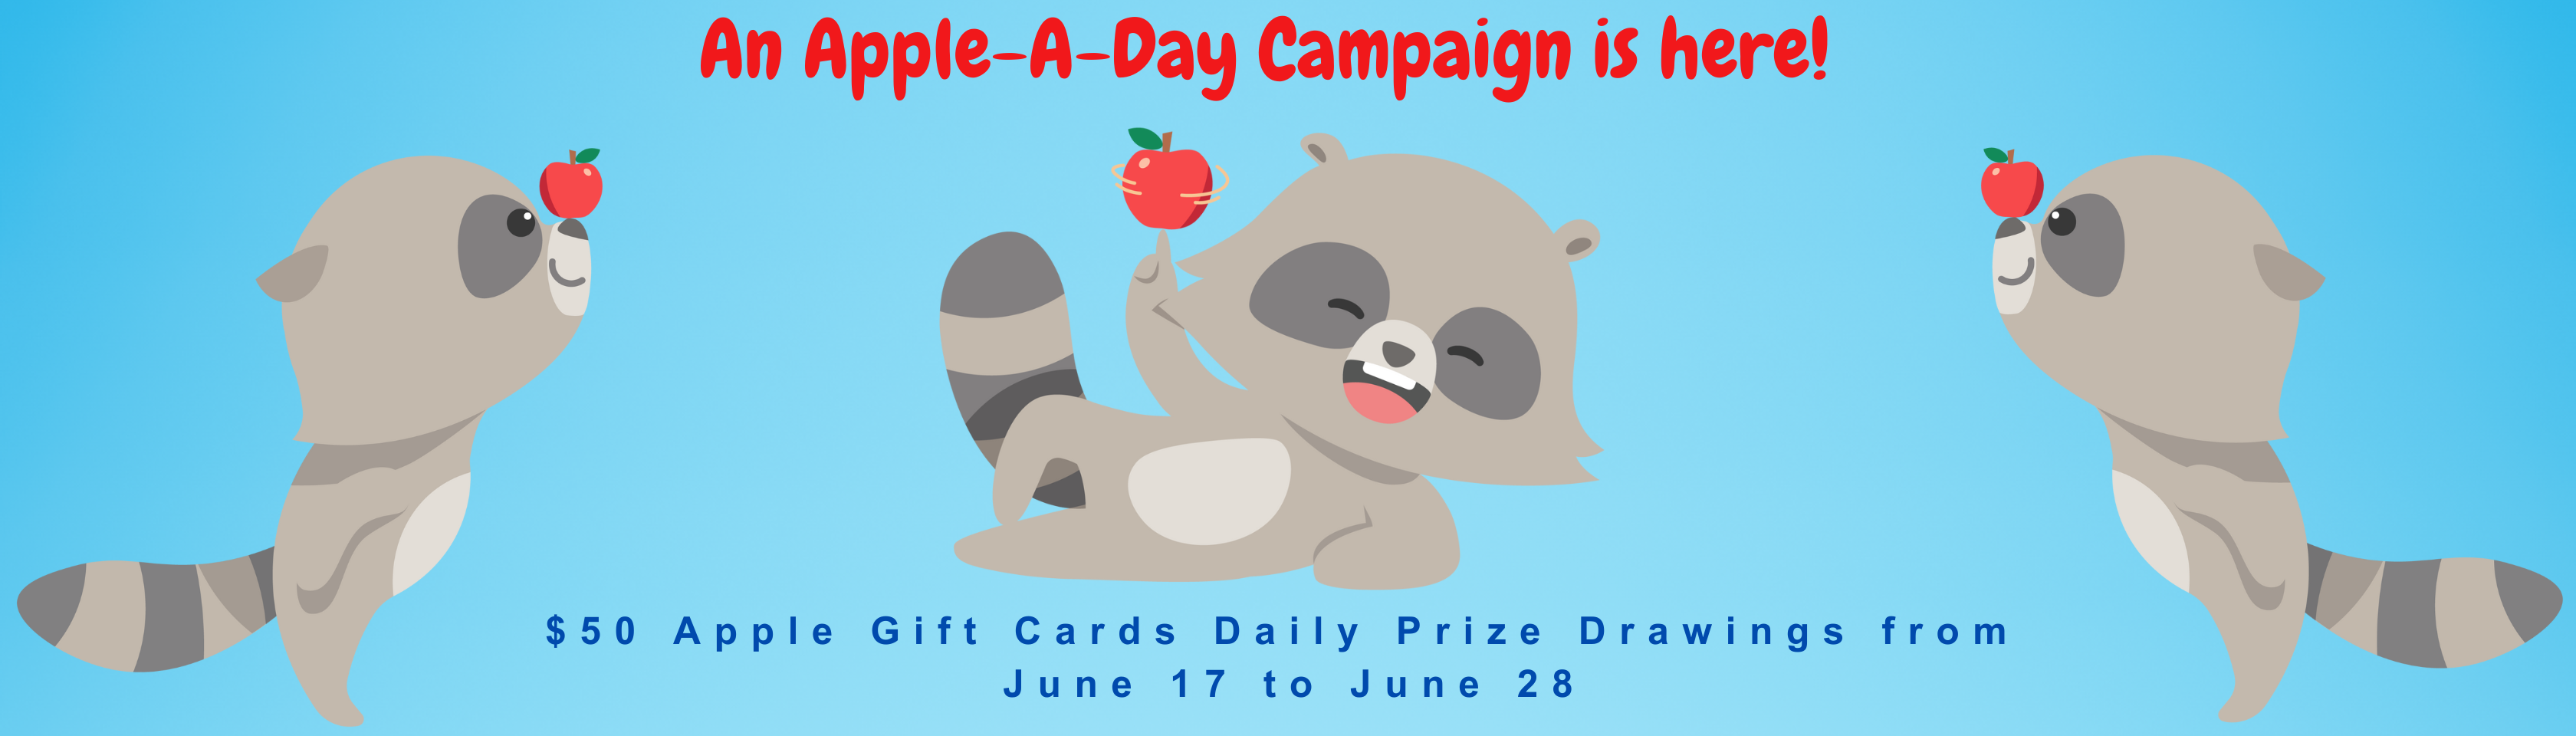 An Apple-A-Day Campaign is here! $50 Apple gift cards daily prize drawings from June 17 to June 28.